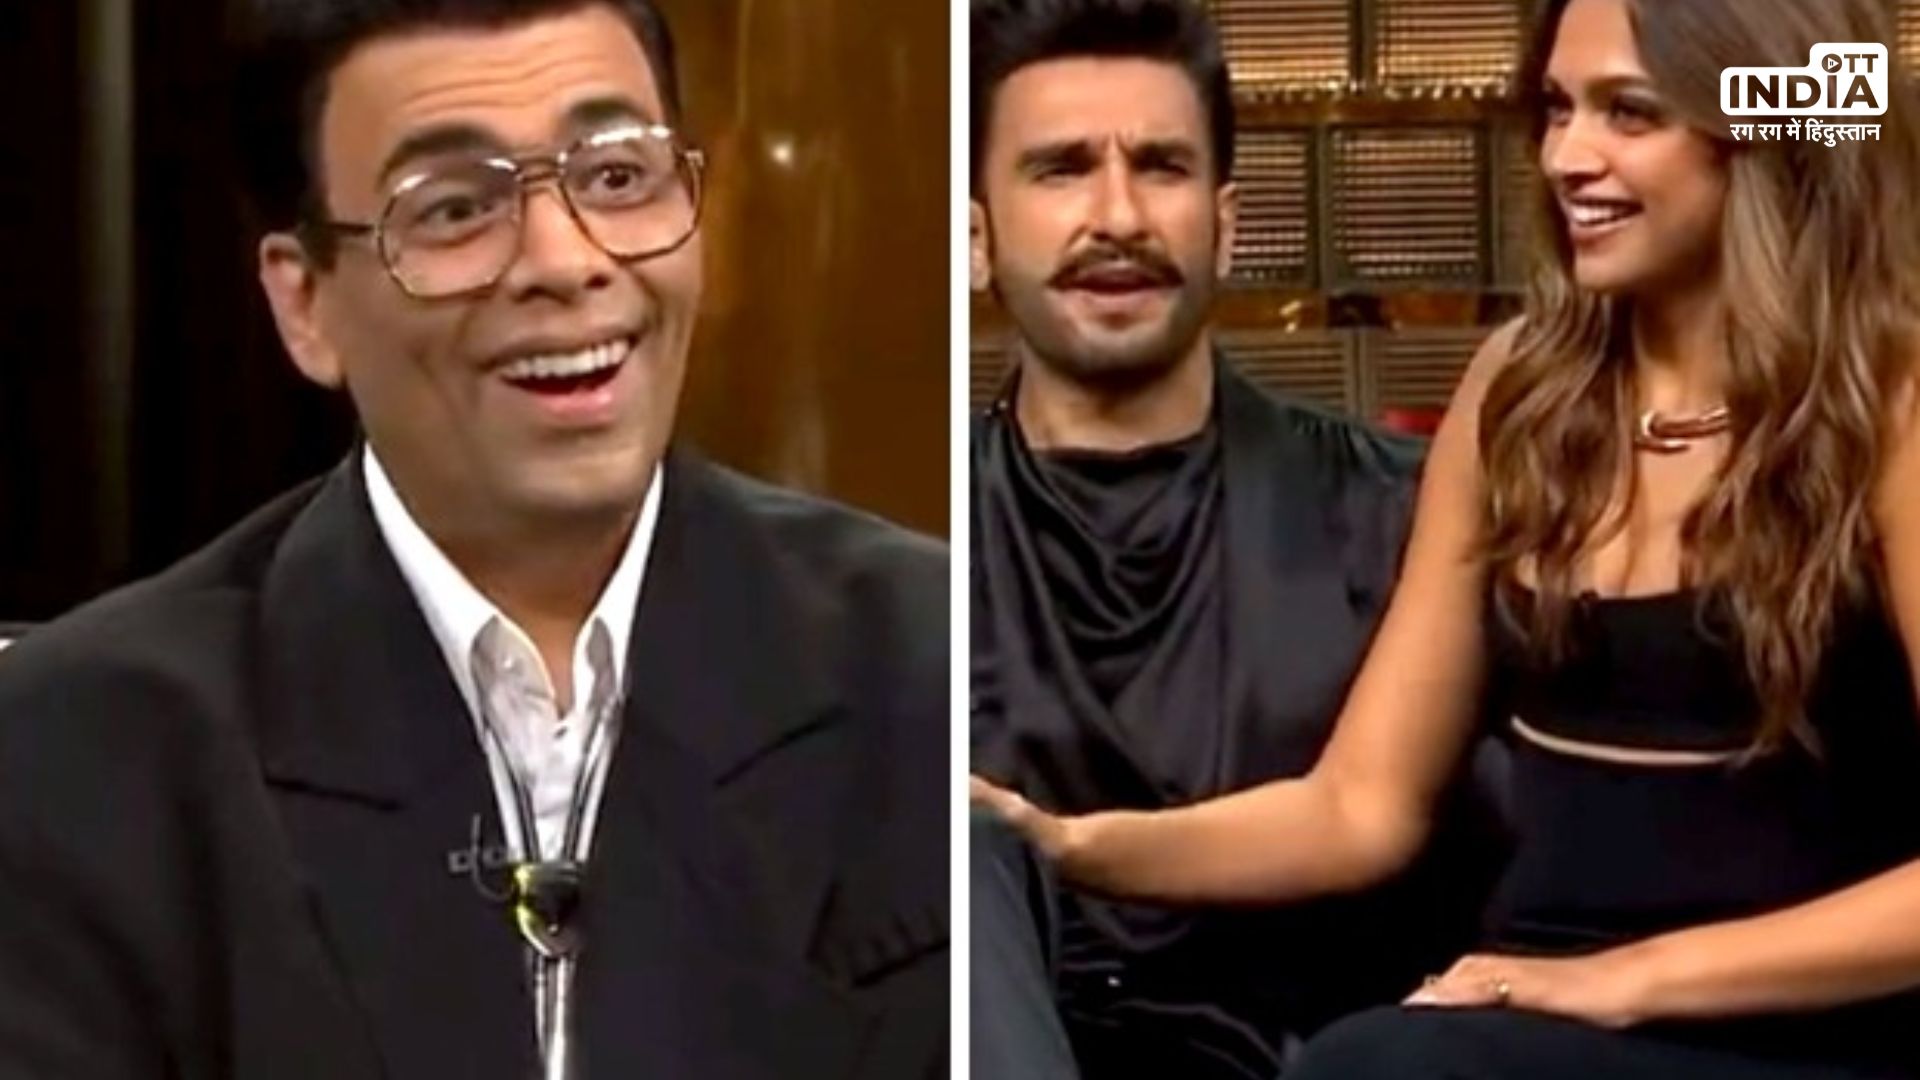 Koffee With karan 8 will premier on 26 october Deepika and Ranveer is first guest